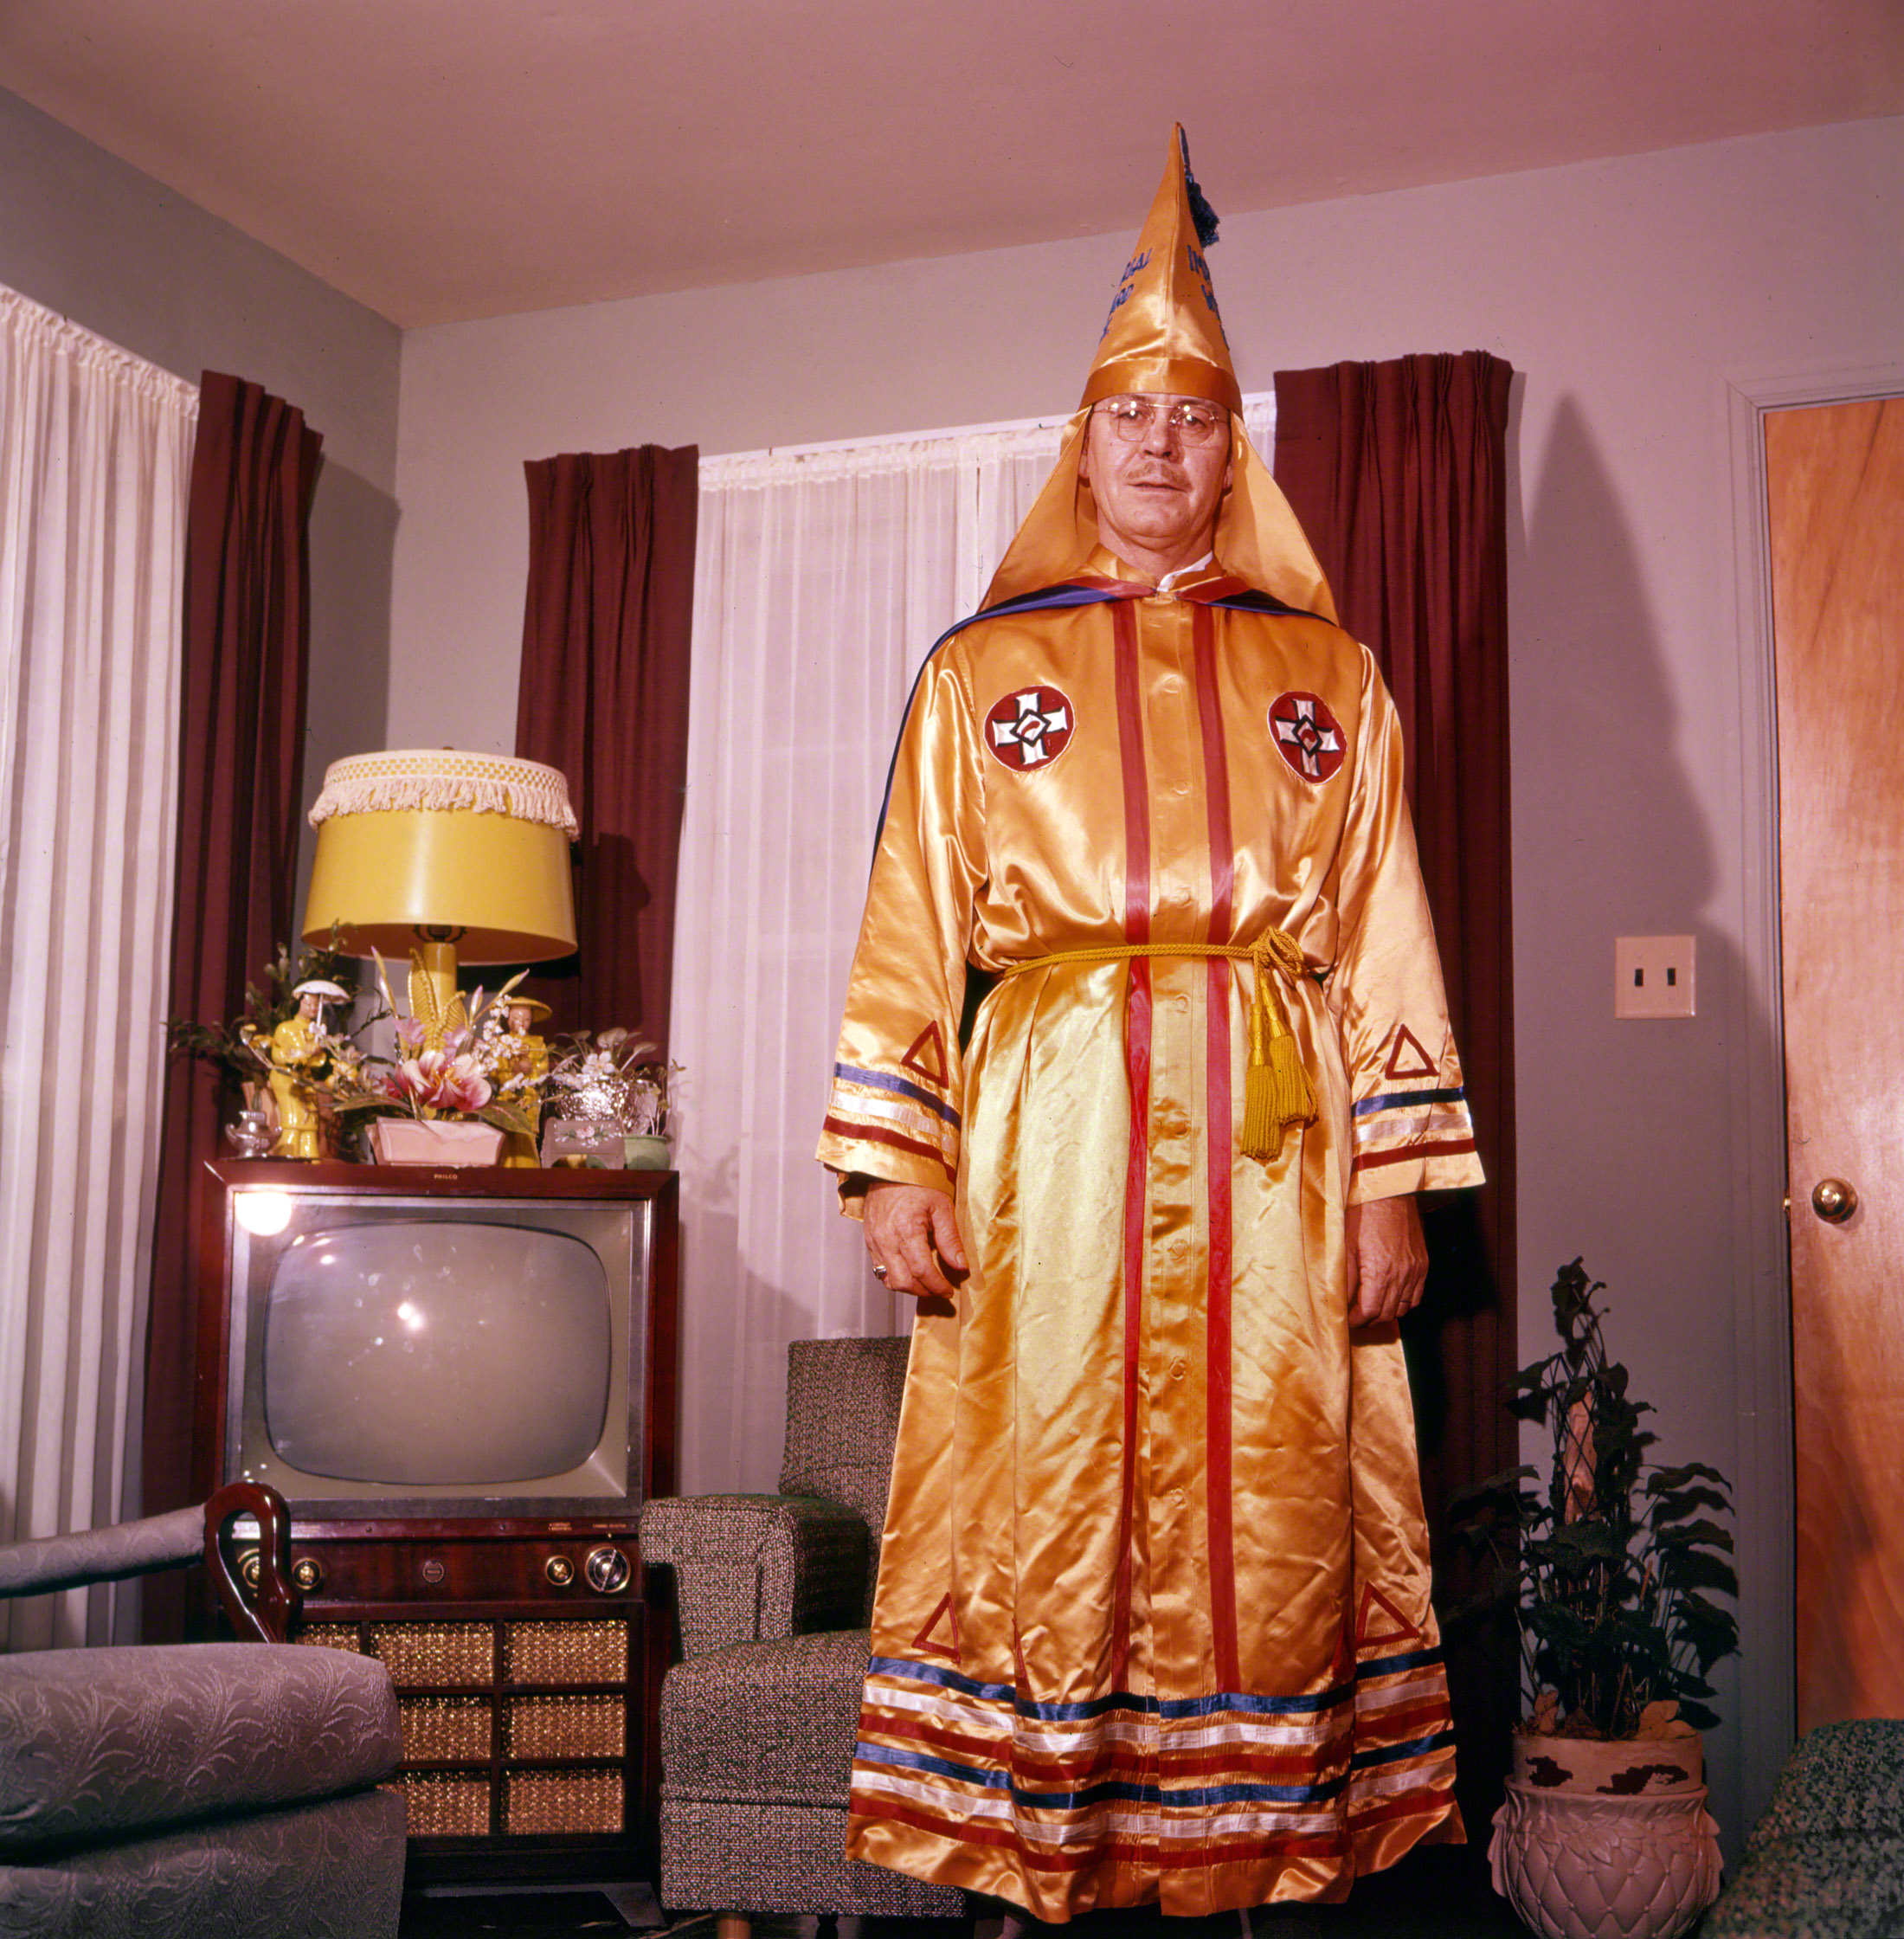 February 1957. "U.S. Klans Imperial Wizard Eldon Edwards posed in his official robes at home." Photo by Jay B. Leviton for Look magazine. View full size.